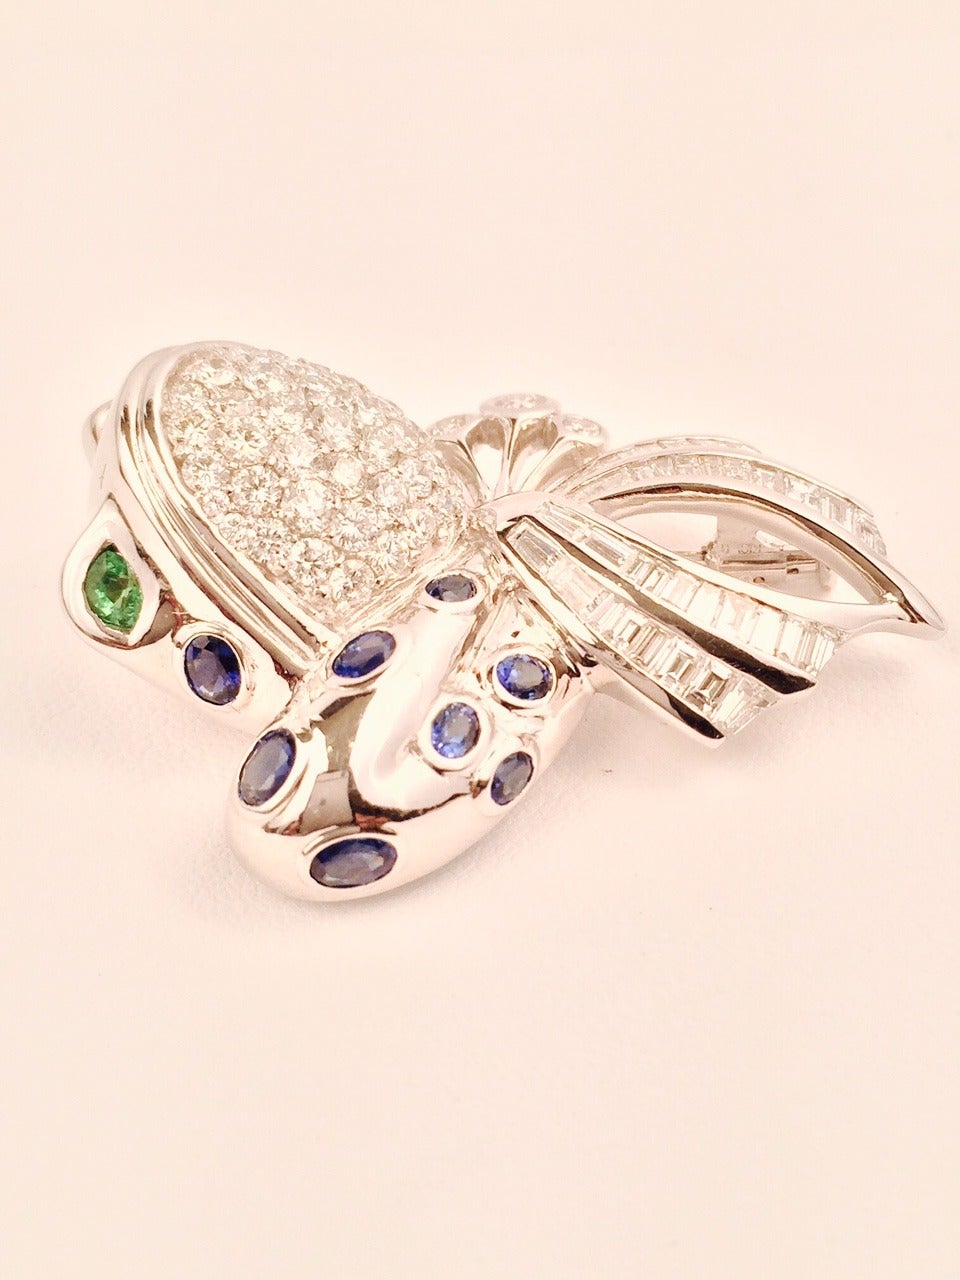 I8K White Gold Diamond and Sapphire Frog Brooch is a conversation piece!  Features Tsavorite eyes and bow shape.  Exquisite white diamonds are round and baguette shaped.  Crafted in the style of Marina B.  Made in Europe.